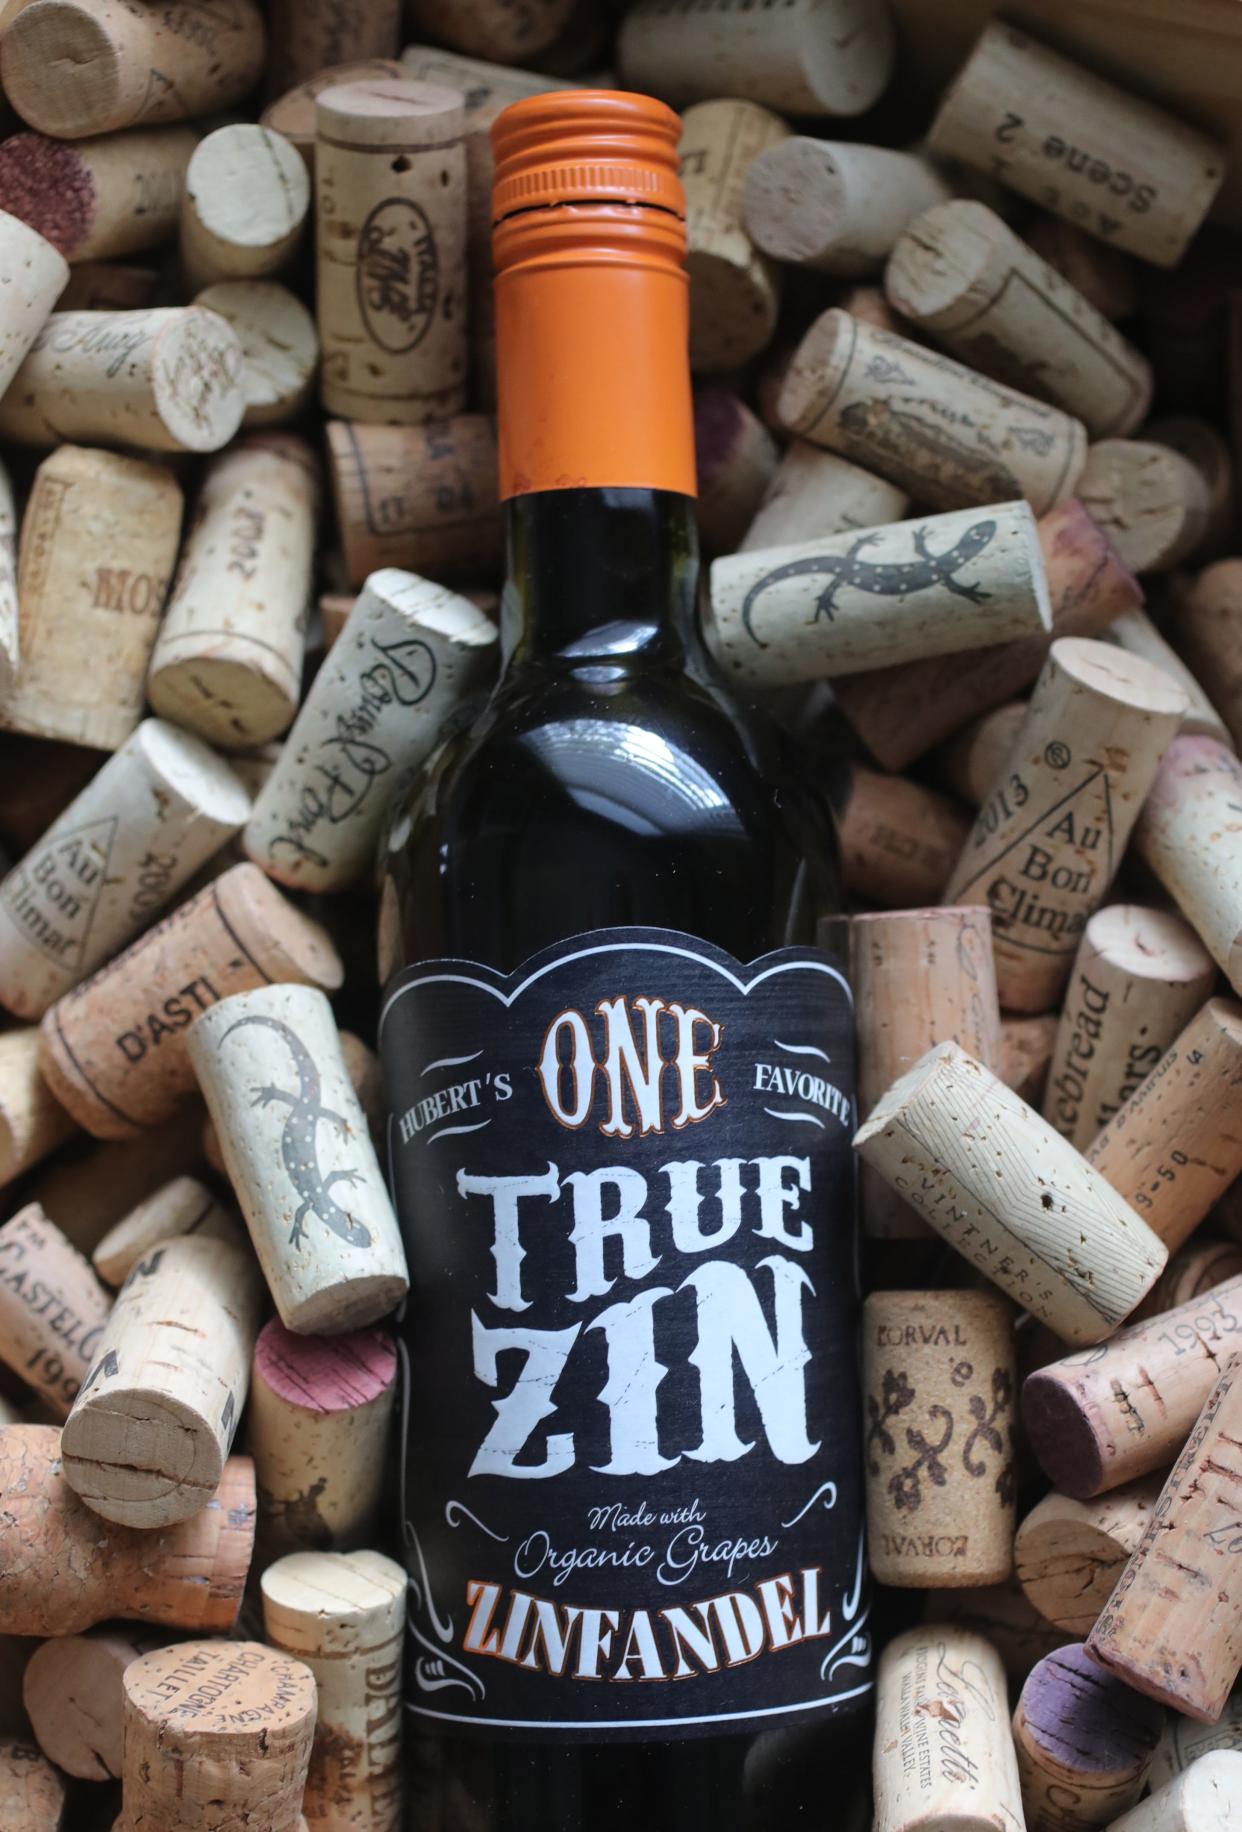 One True Zin is actually made from 100% Primitivo grapes grown in Italy.